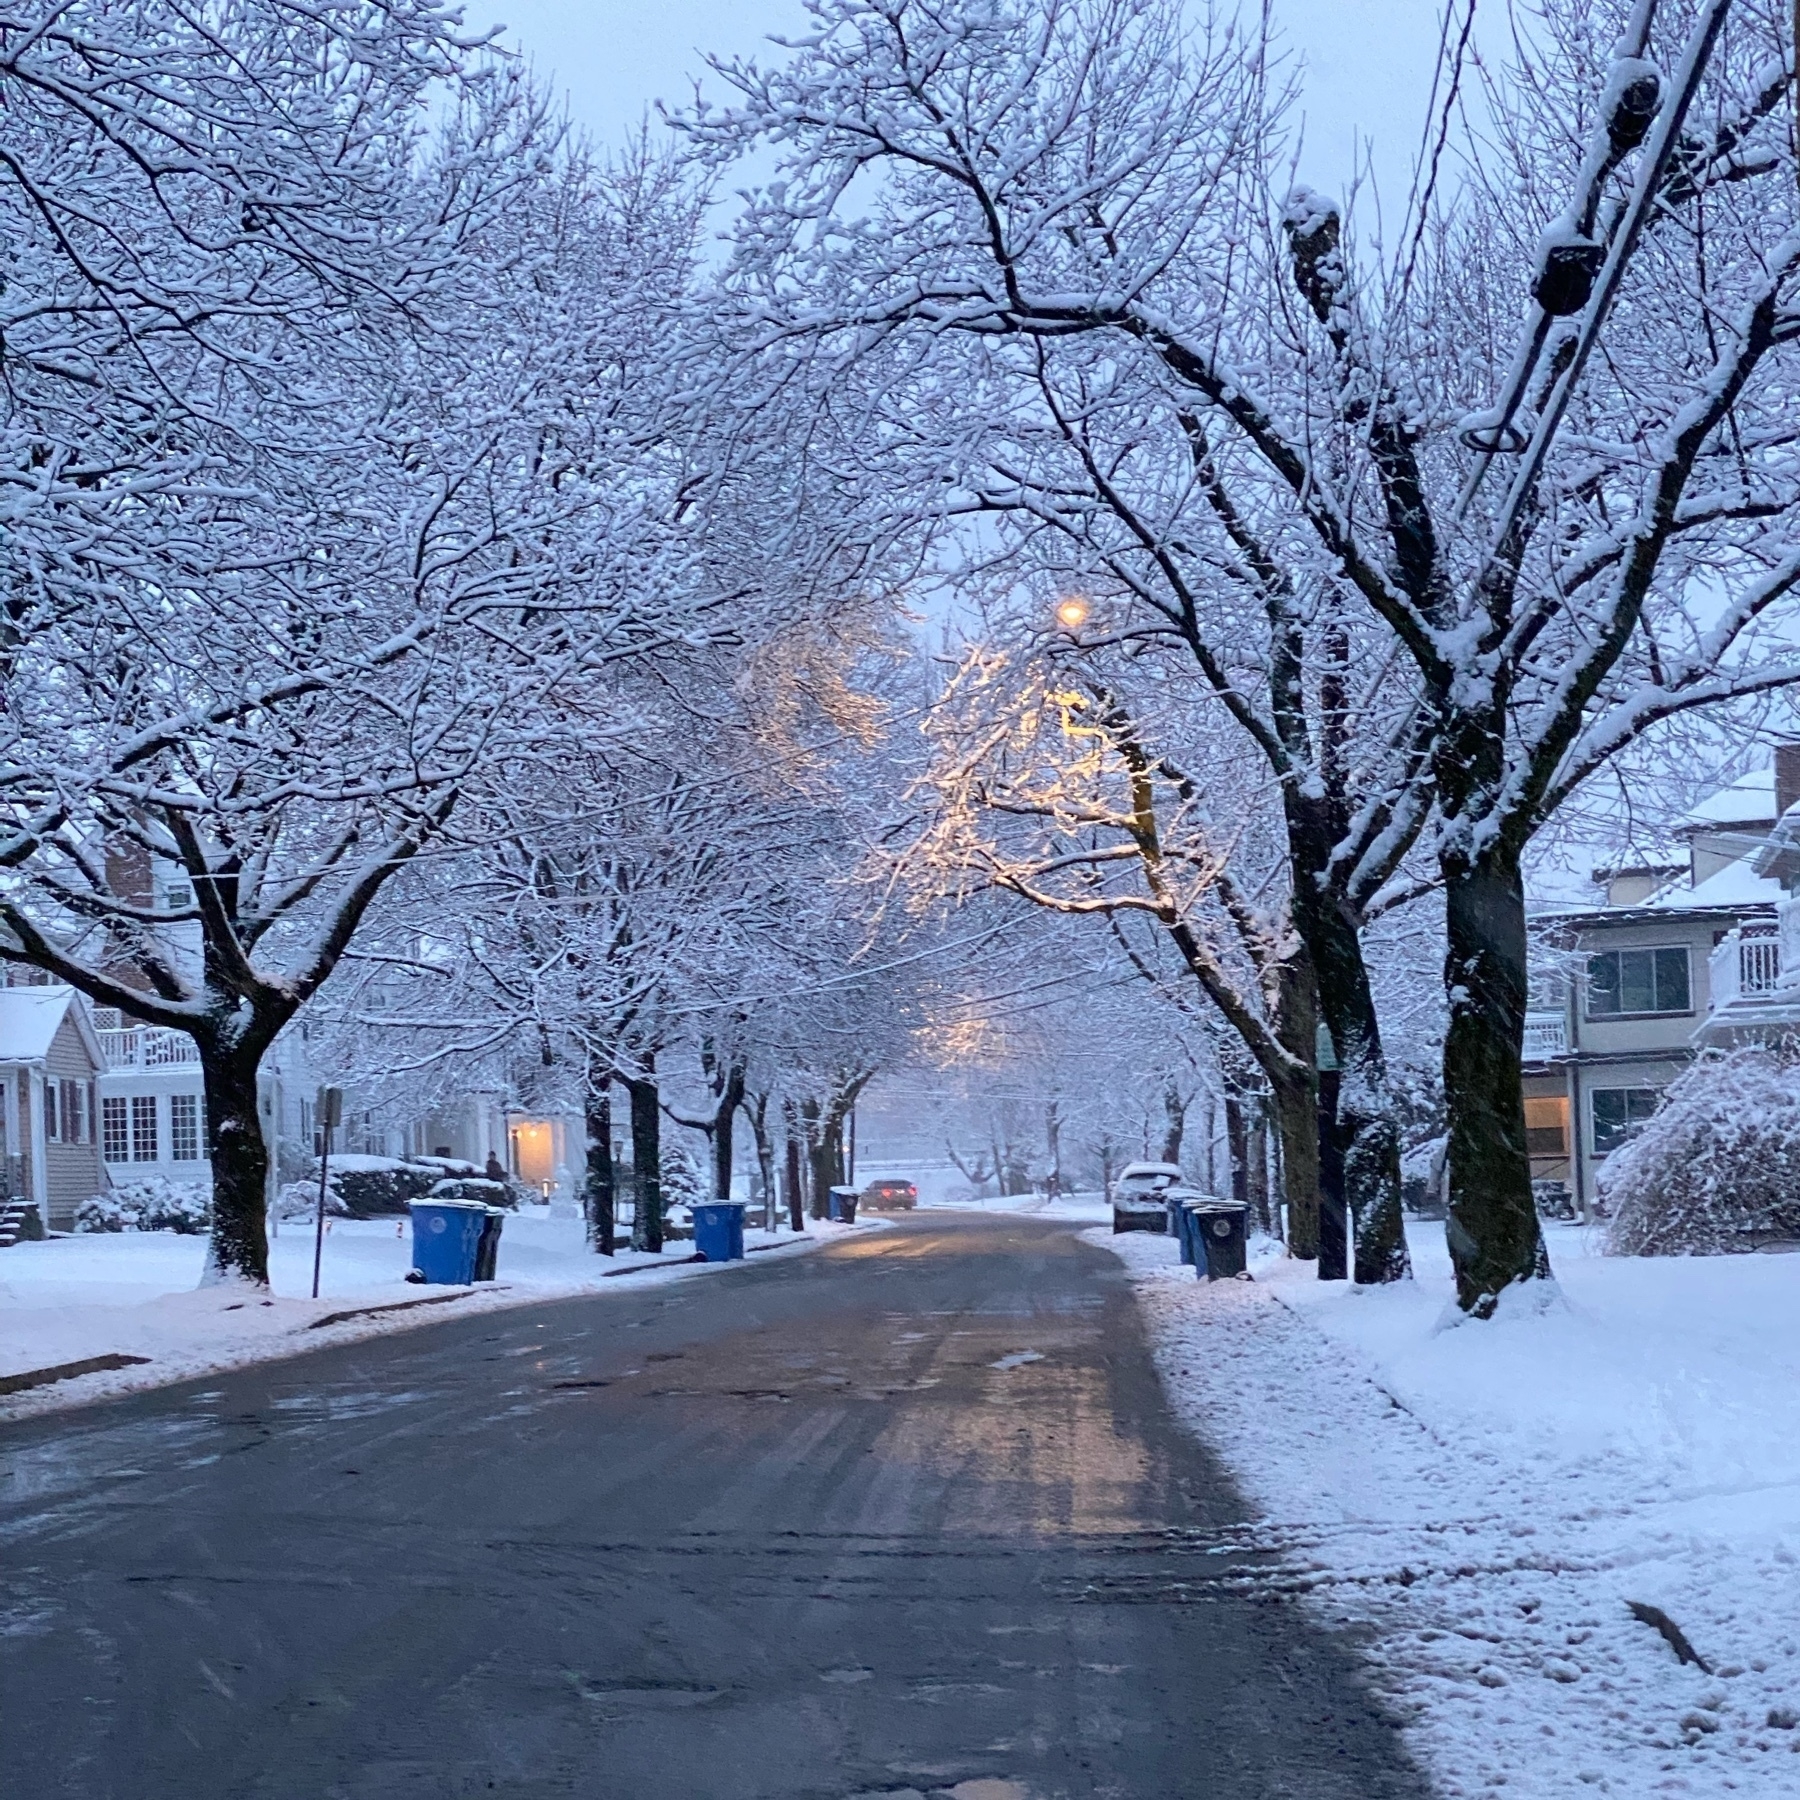 View of a street in the evening with snow covering the adjacent trees and sidewalks.